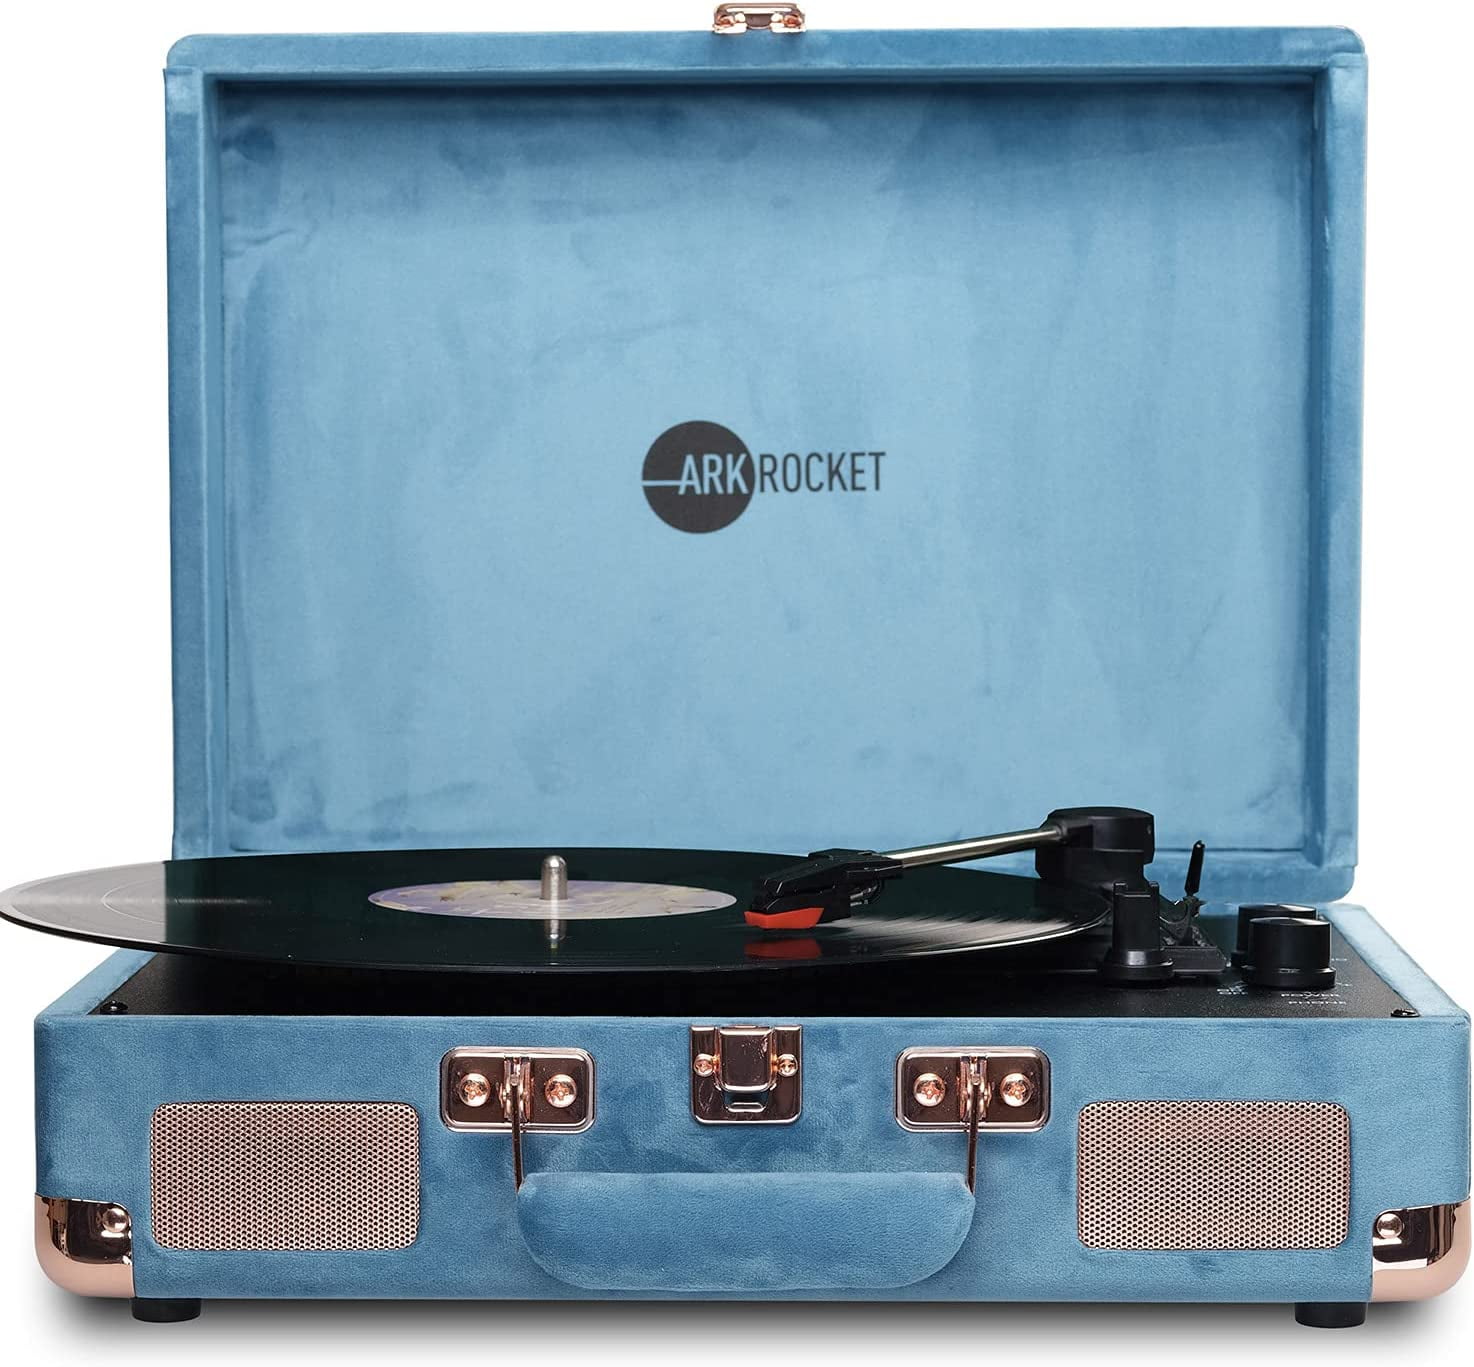 Speakers　Suitcase　Upgraded　V　with　Audio　Built-in　Bluetooth　Player　(Blue　Turntable　Sound　3-Speed　Vintage　Turntable　Record　DJ機材　Arkrocket　Curiosity